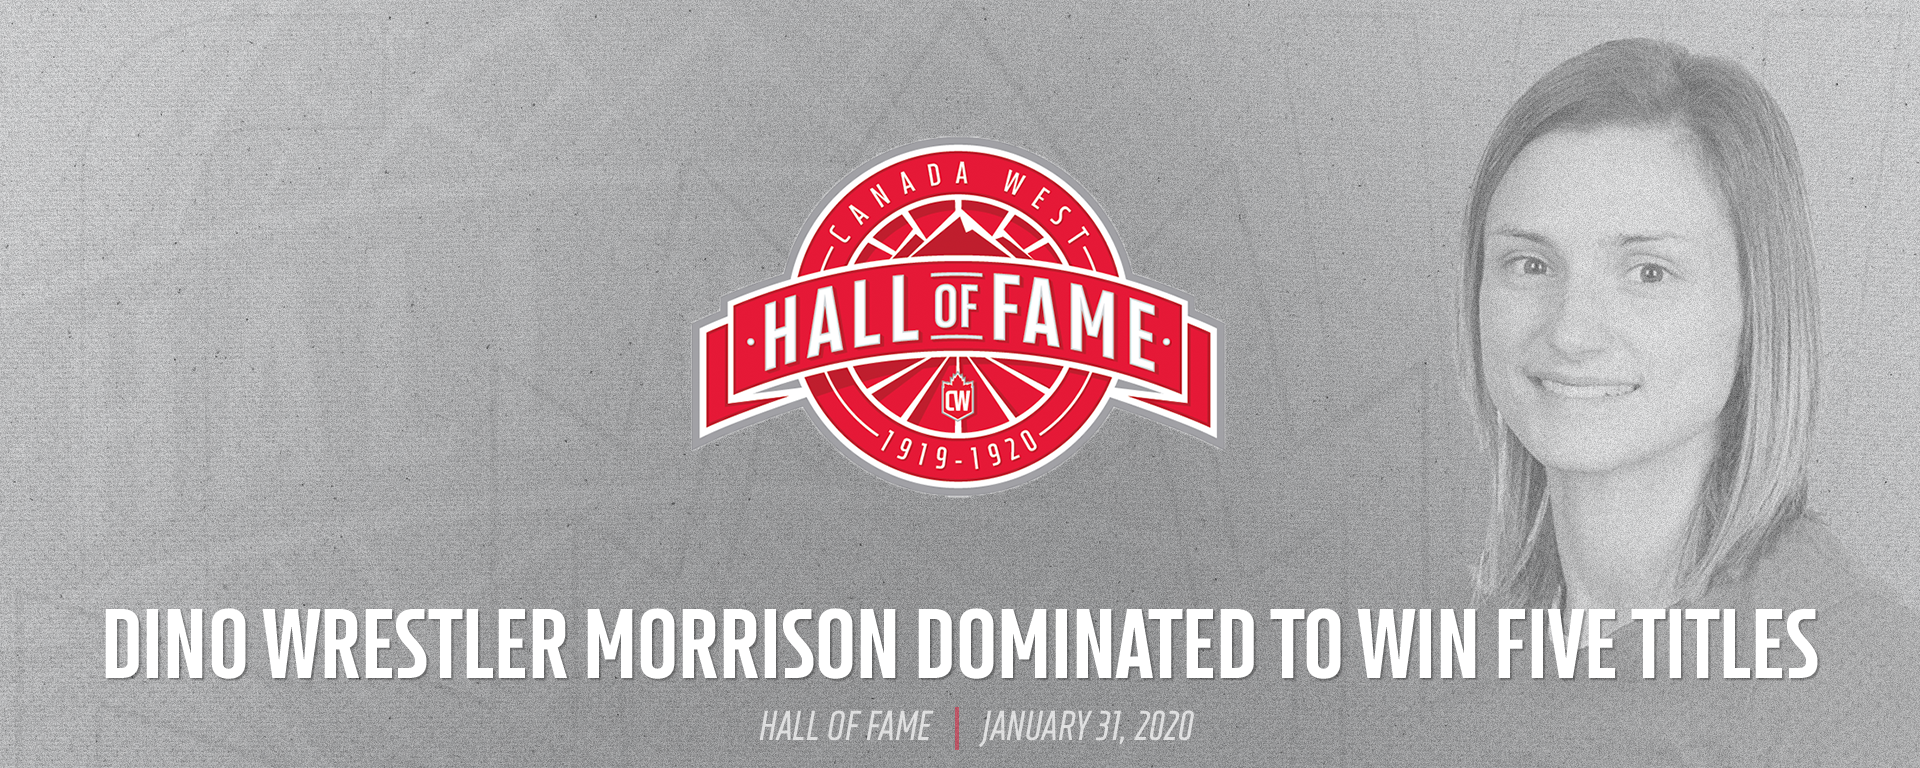 genevieve_morrisson_canada_west_hall_of_fame_logo-2.png